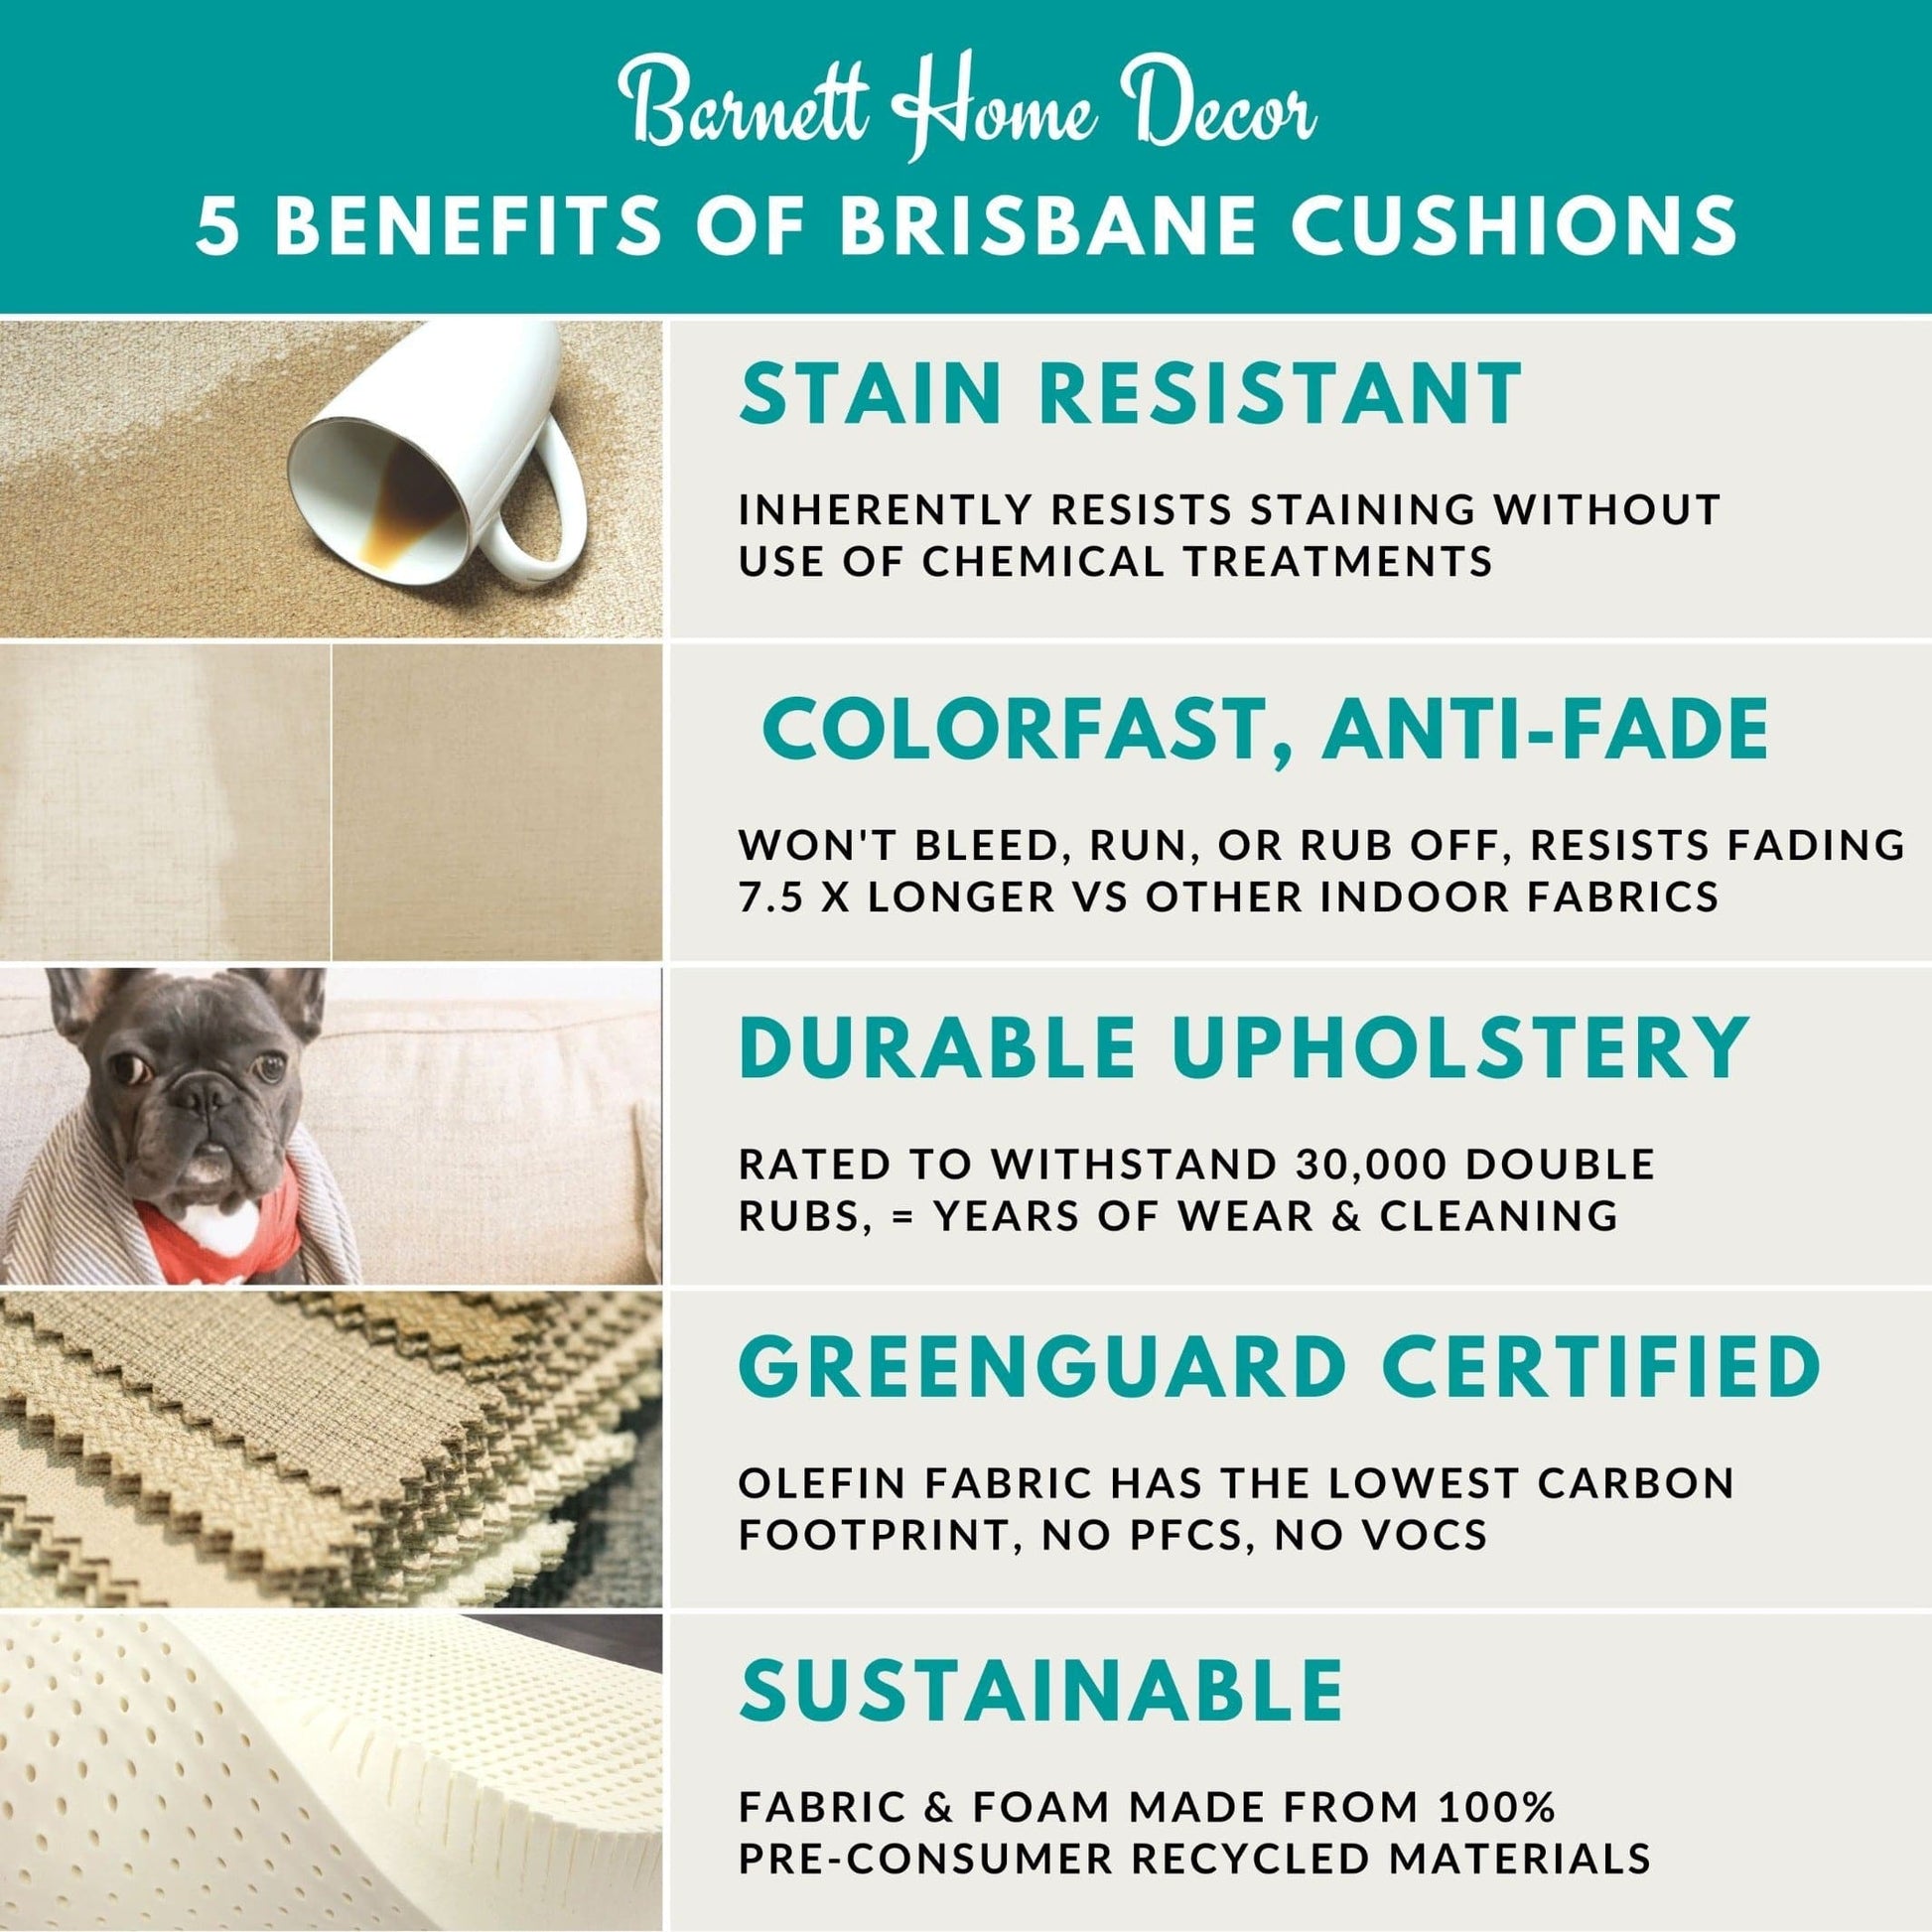 Barnett Home Decor 5 Benefits of Brisbane Cushions Stain Resistant Colorfast Anti-Fade Durable Upholstery Greenguard Certified Sustainable